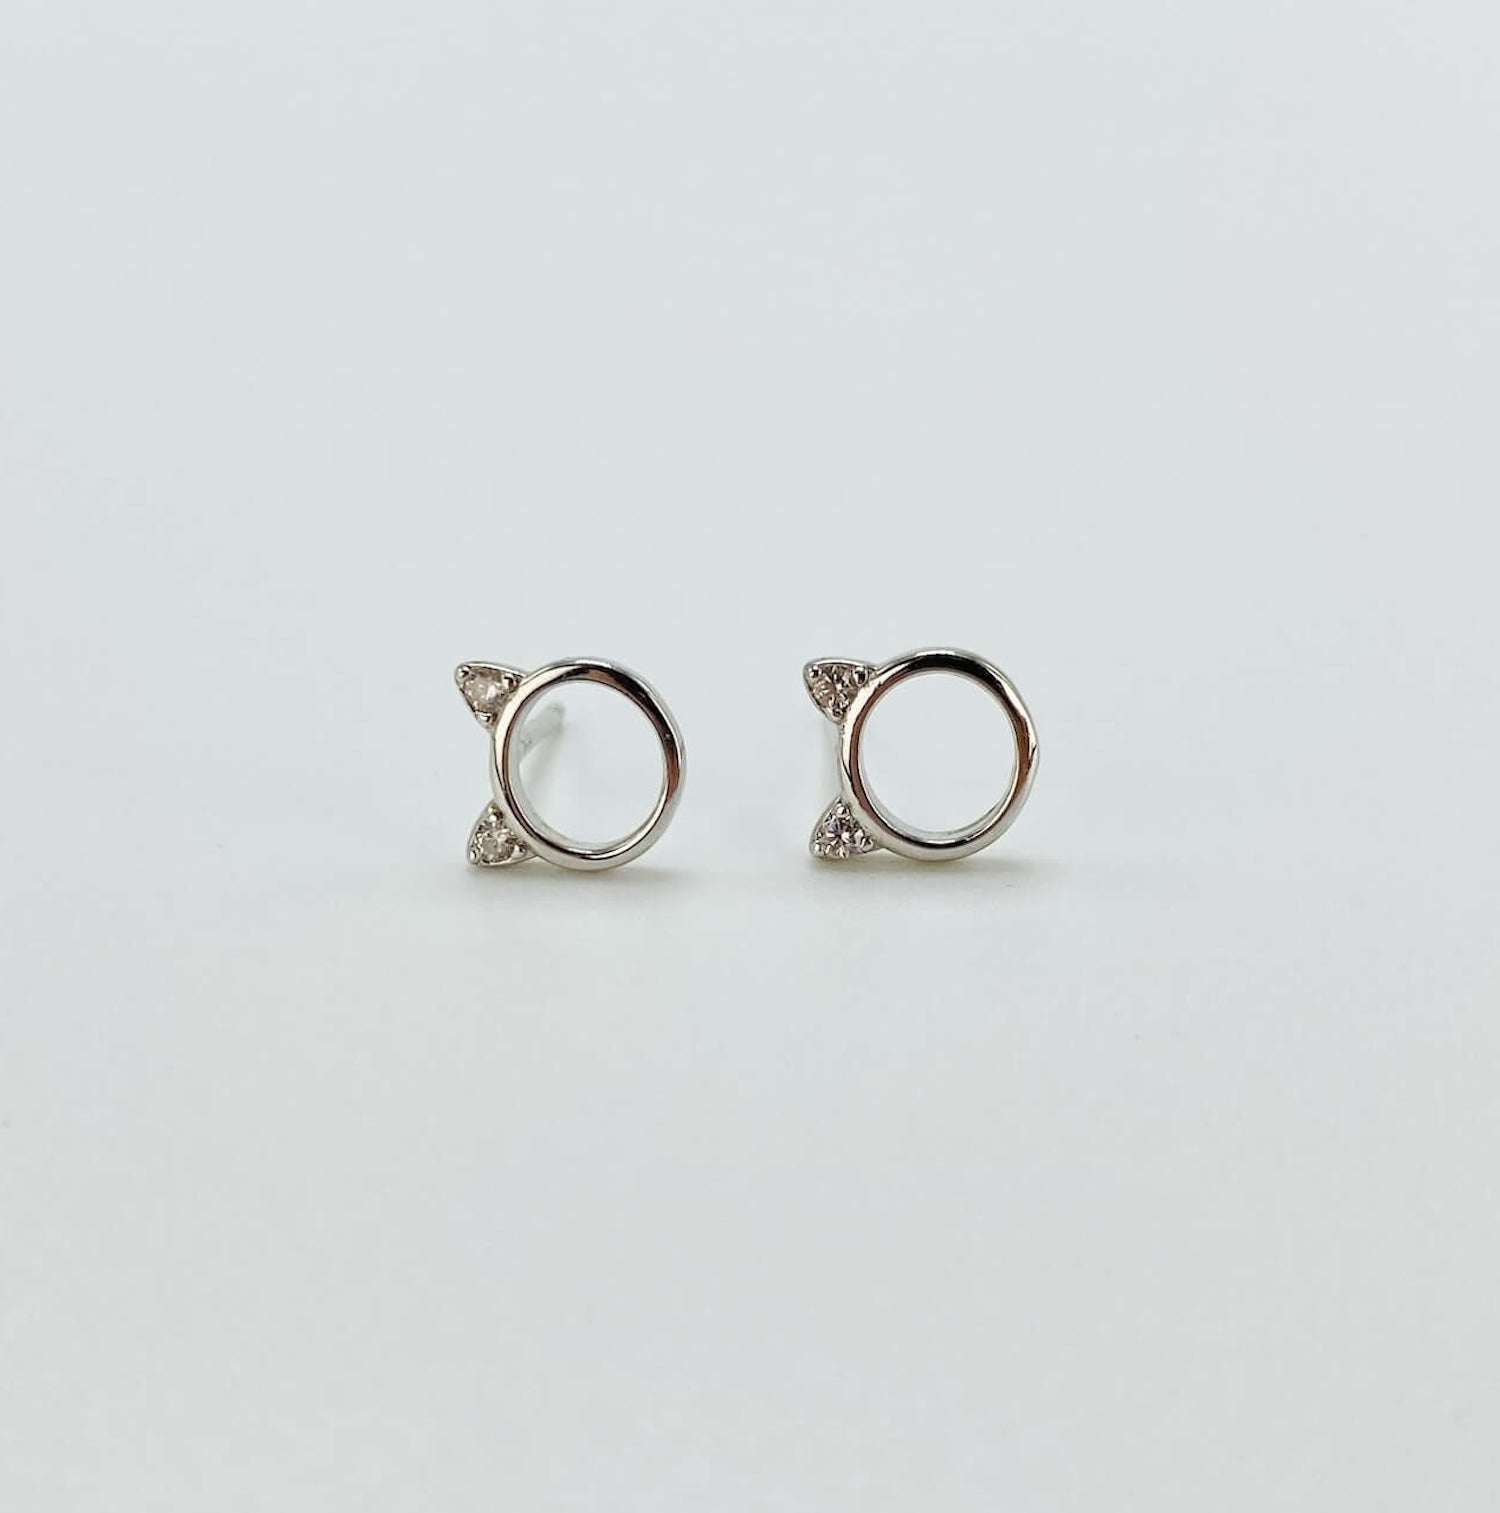 Sterling silver minimalist cat head &quot;o&quot; stud earrings with cubic zirconia gems in rose gold and silver.